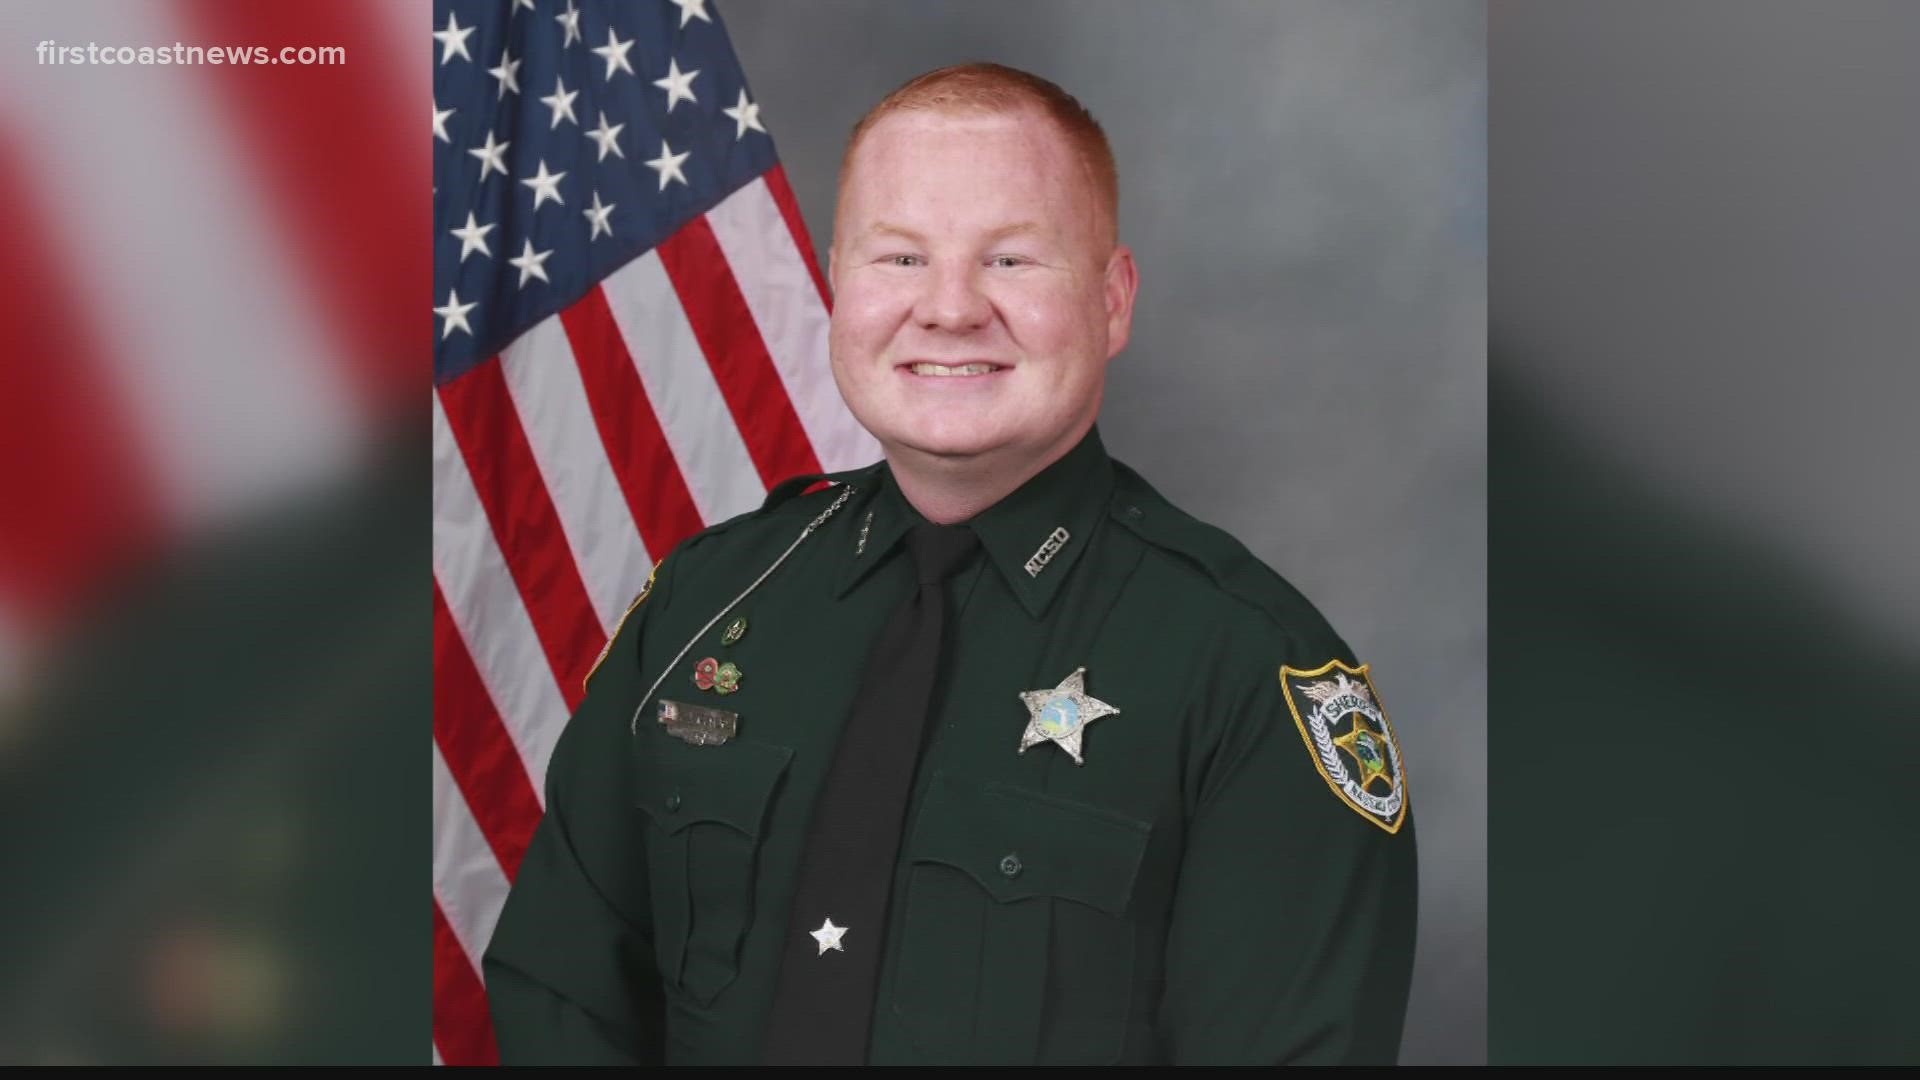 Moyers, 29, died at UF Health in Jacksonville where he was being treated after being shot in the face and back, according to the sheriff’s office.